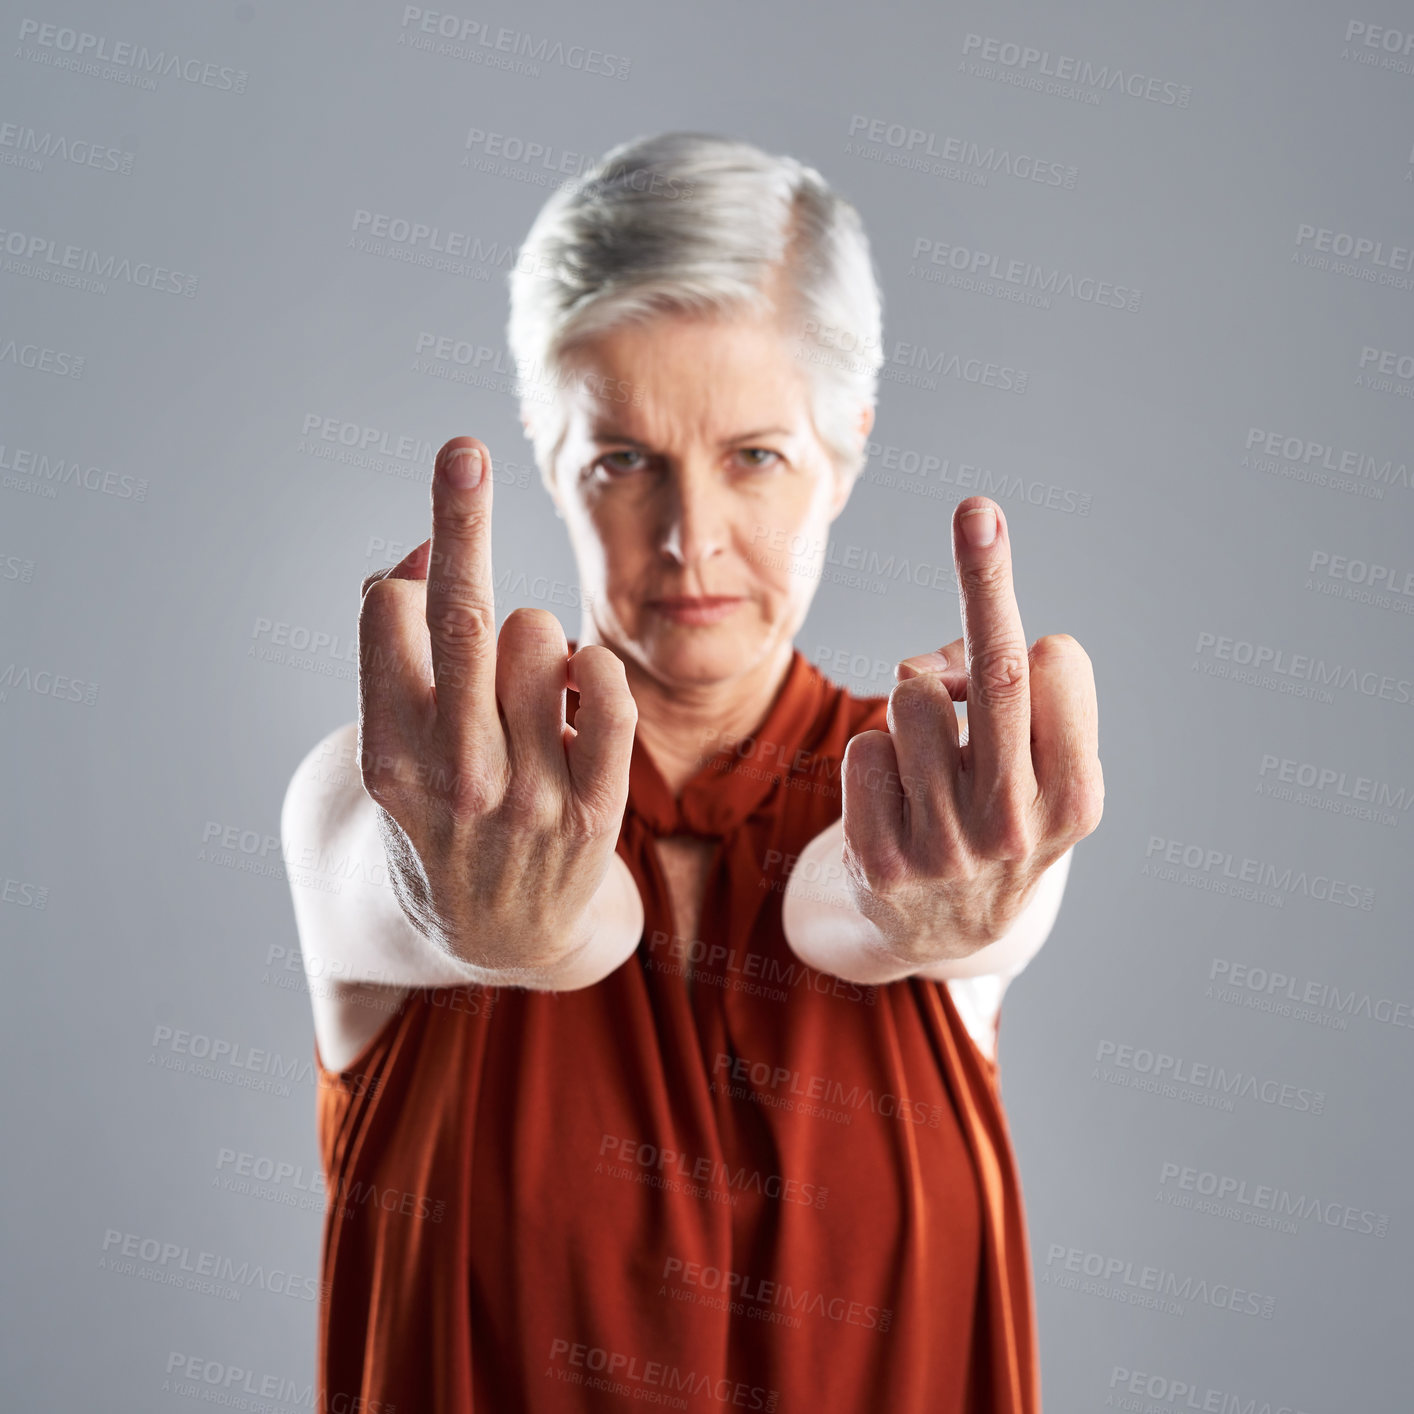 Buy stock photo Portrait of mature woman showing the middle finger against a grey background